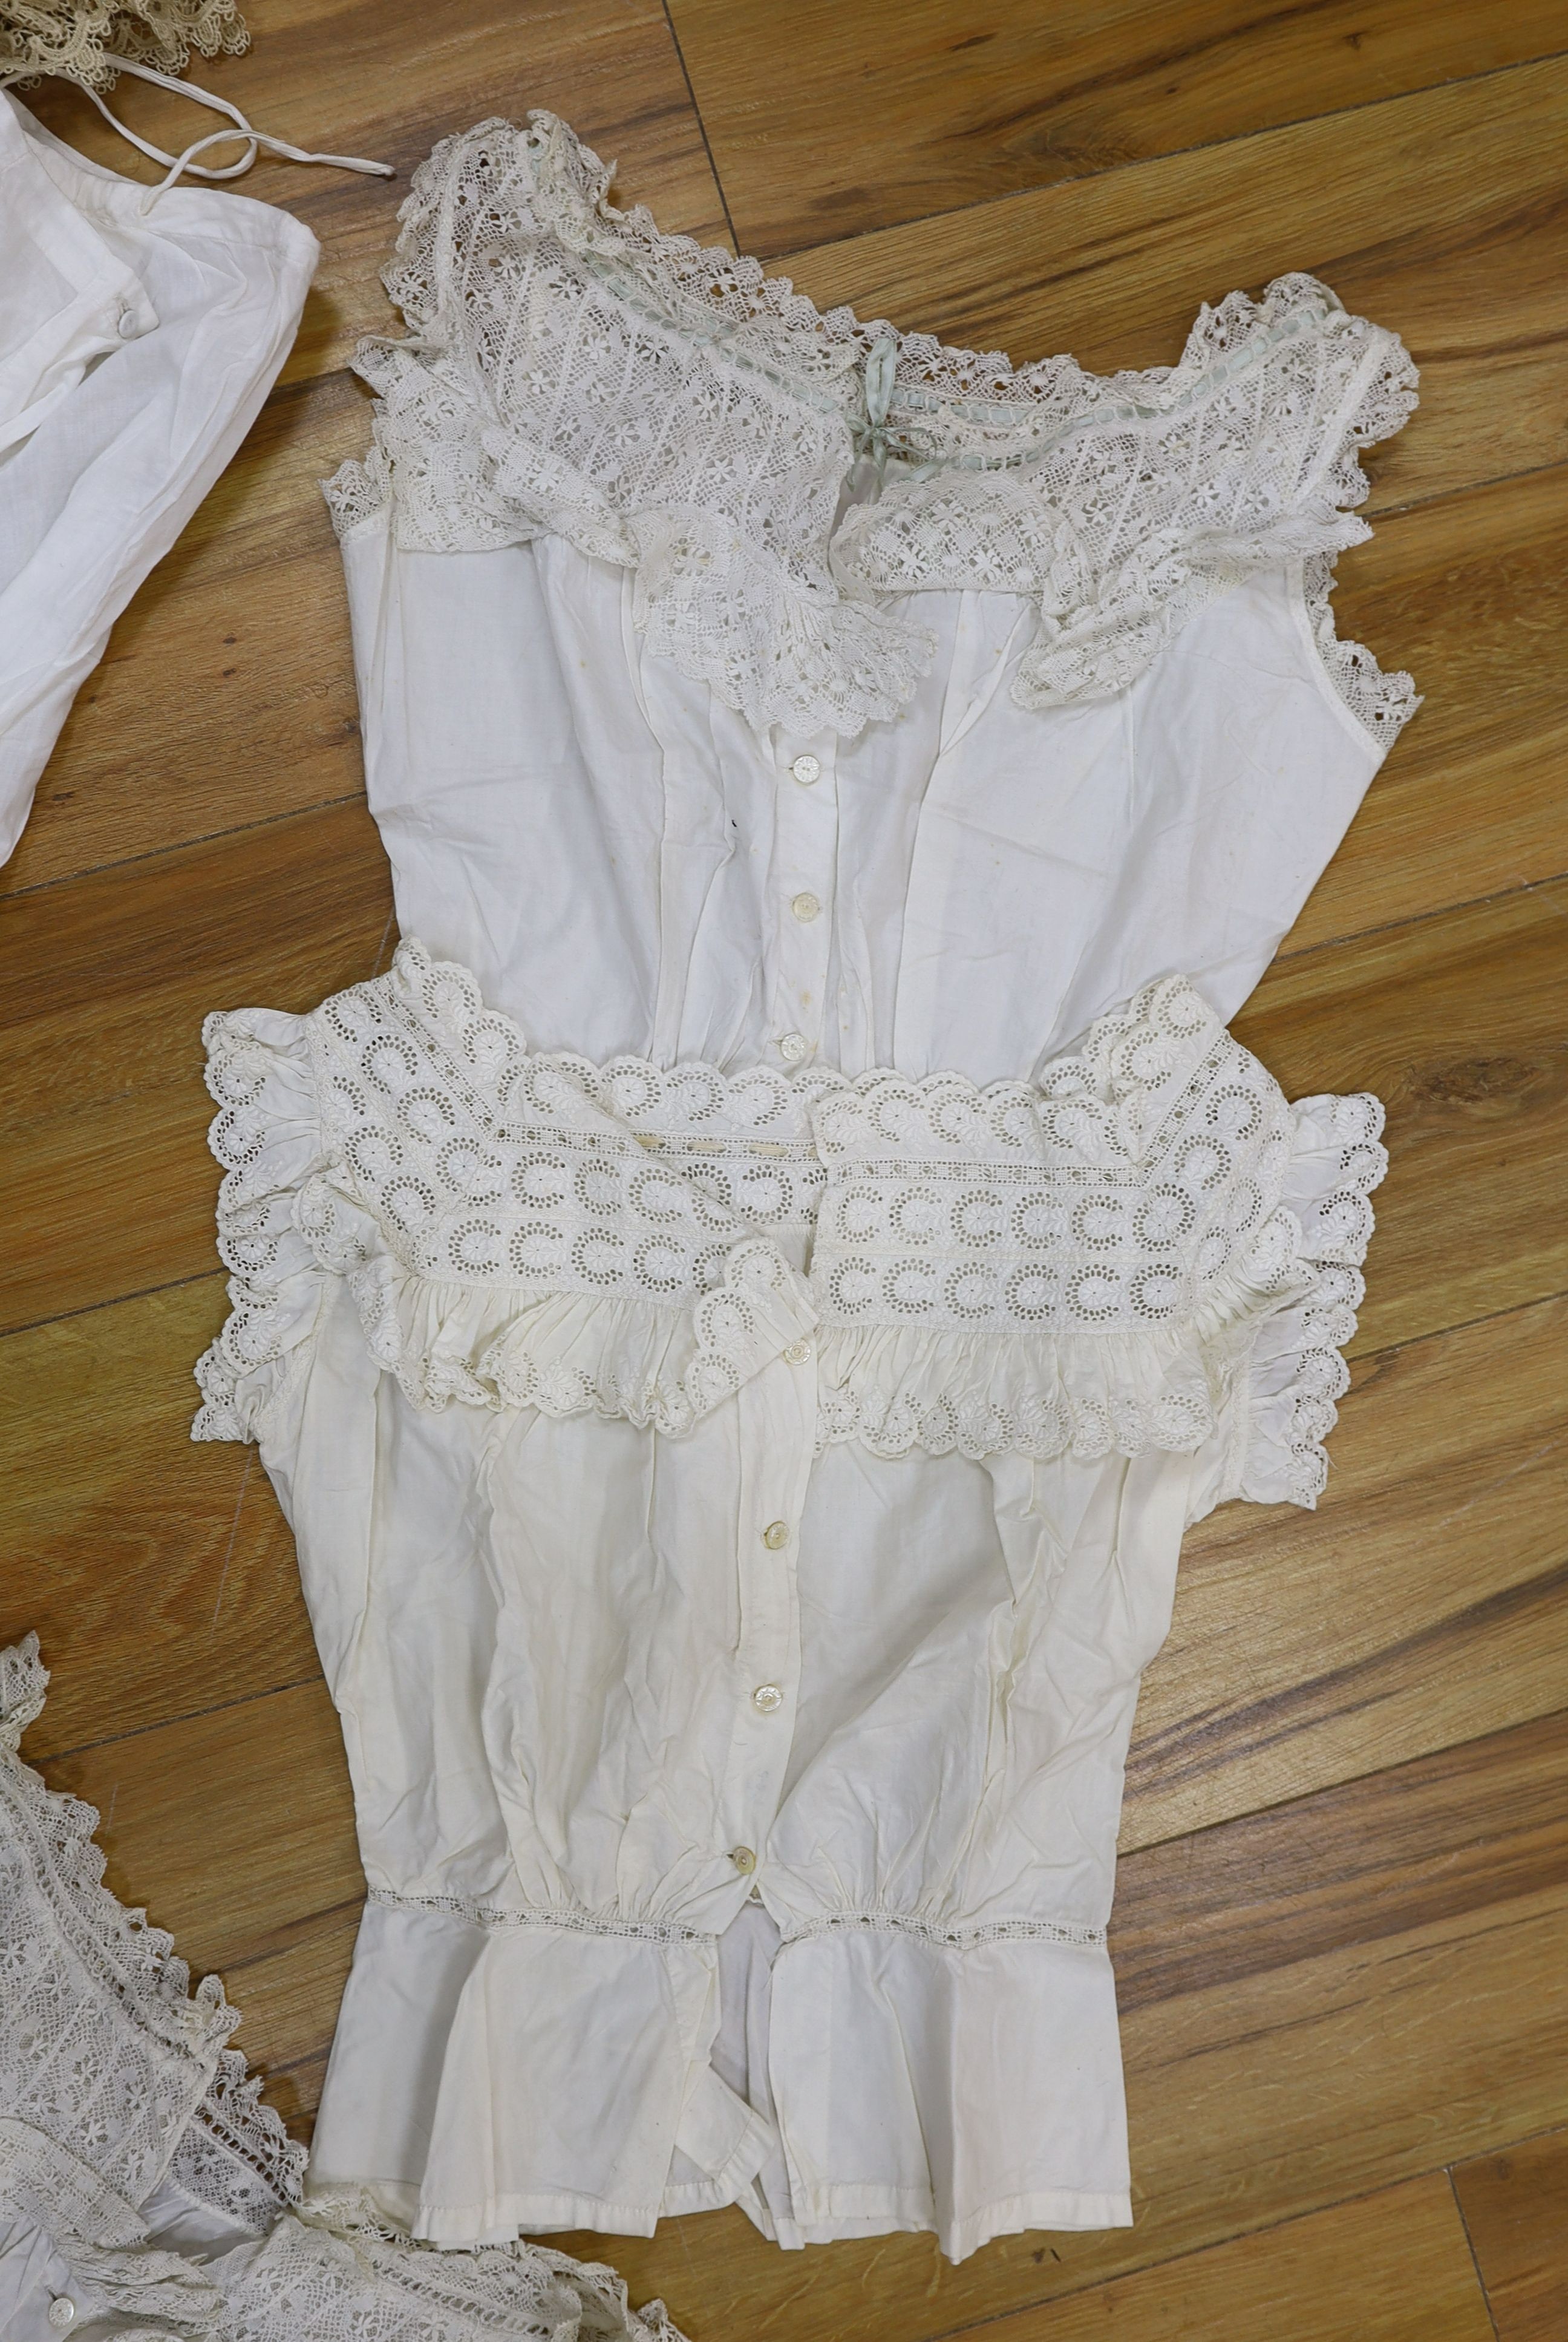 Five Victorian and Edwardian lace inserted camisole tops, a cream chemical lace jacket and a whitework and lace petticoat